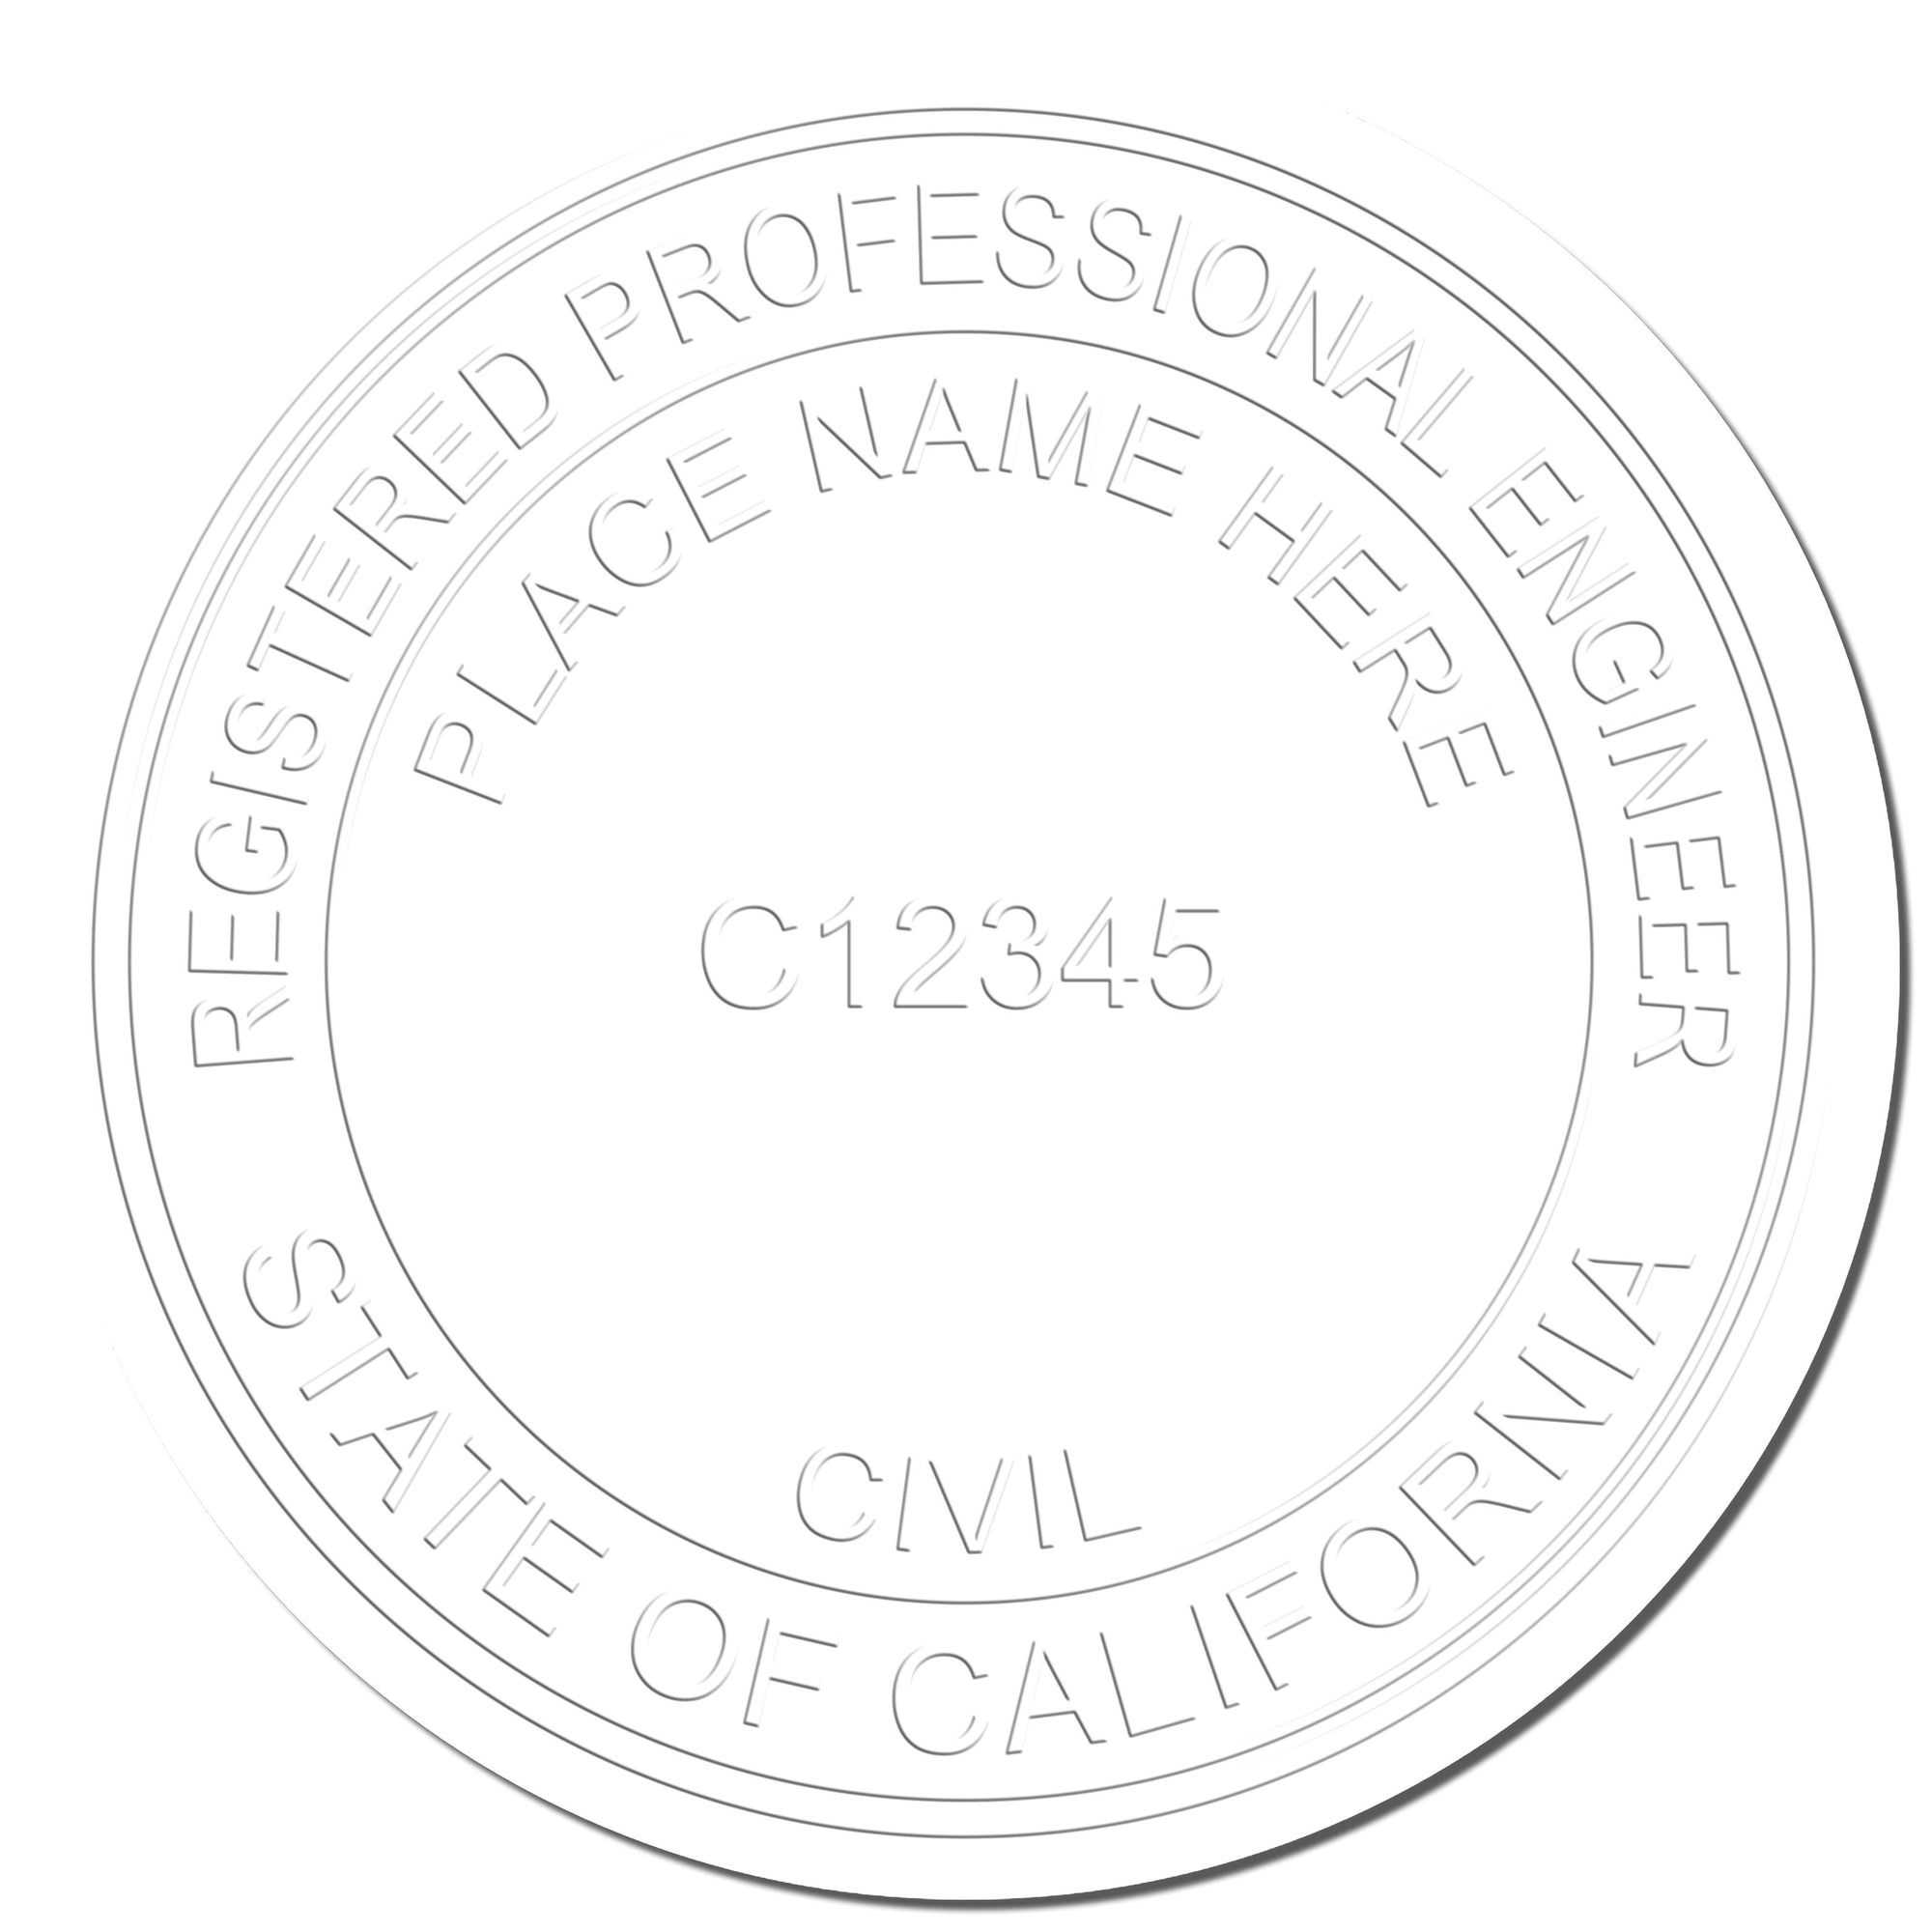 The main image for the California Engineer Desk Seal depicting a sample of the imprint and electronic files